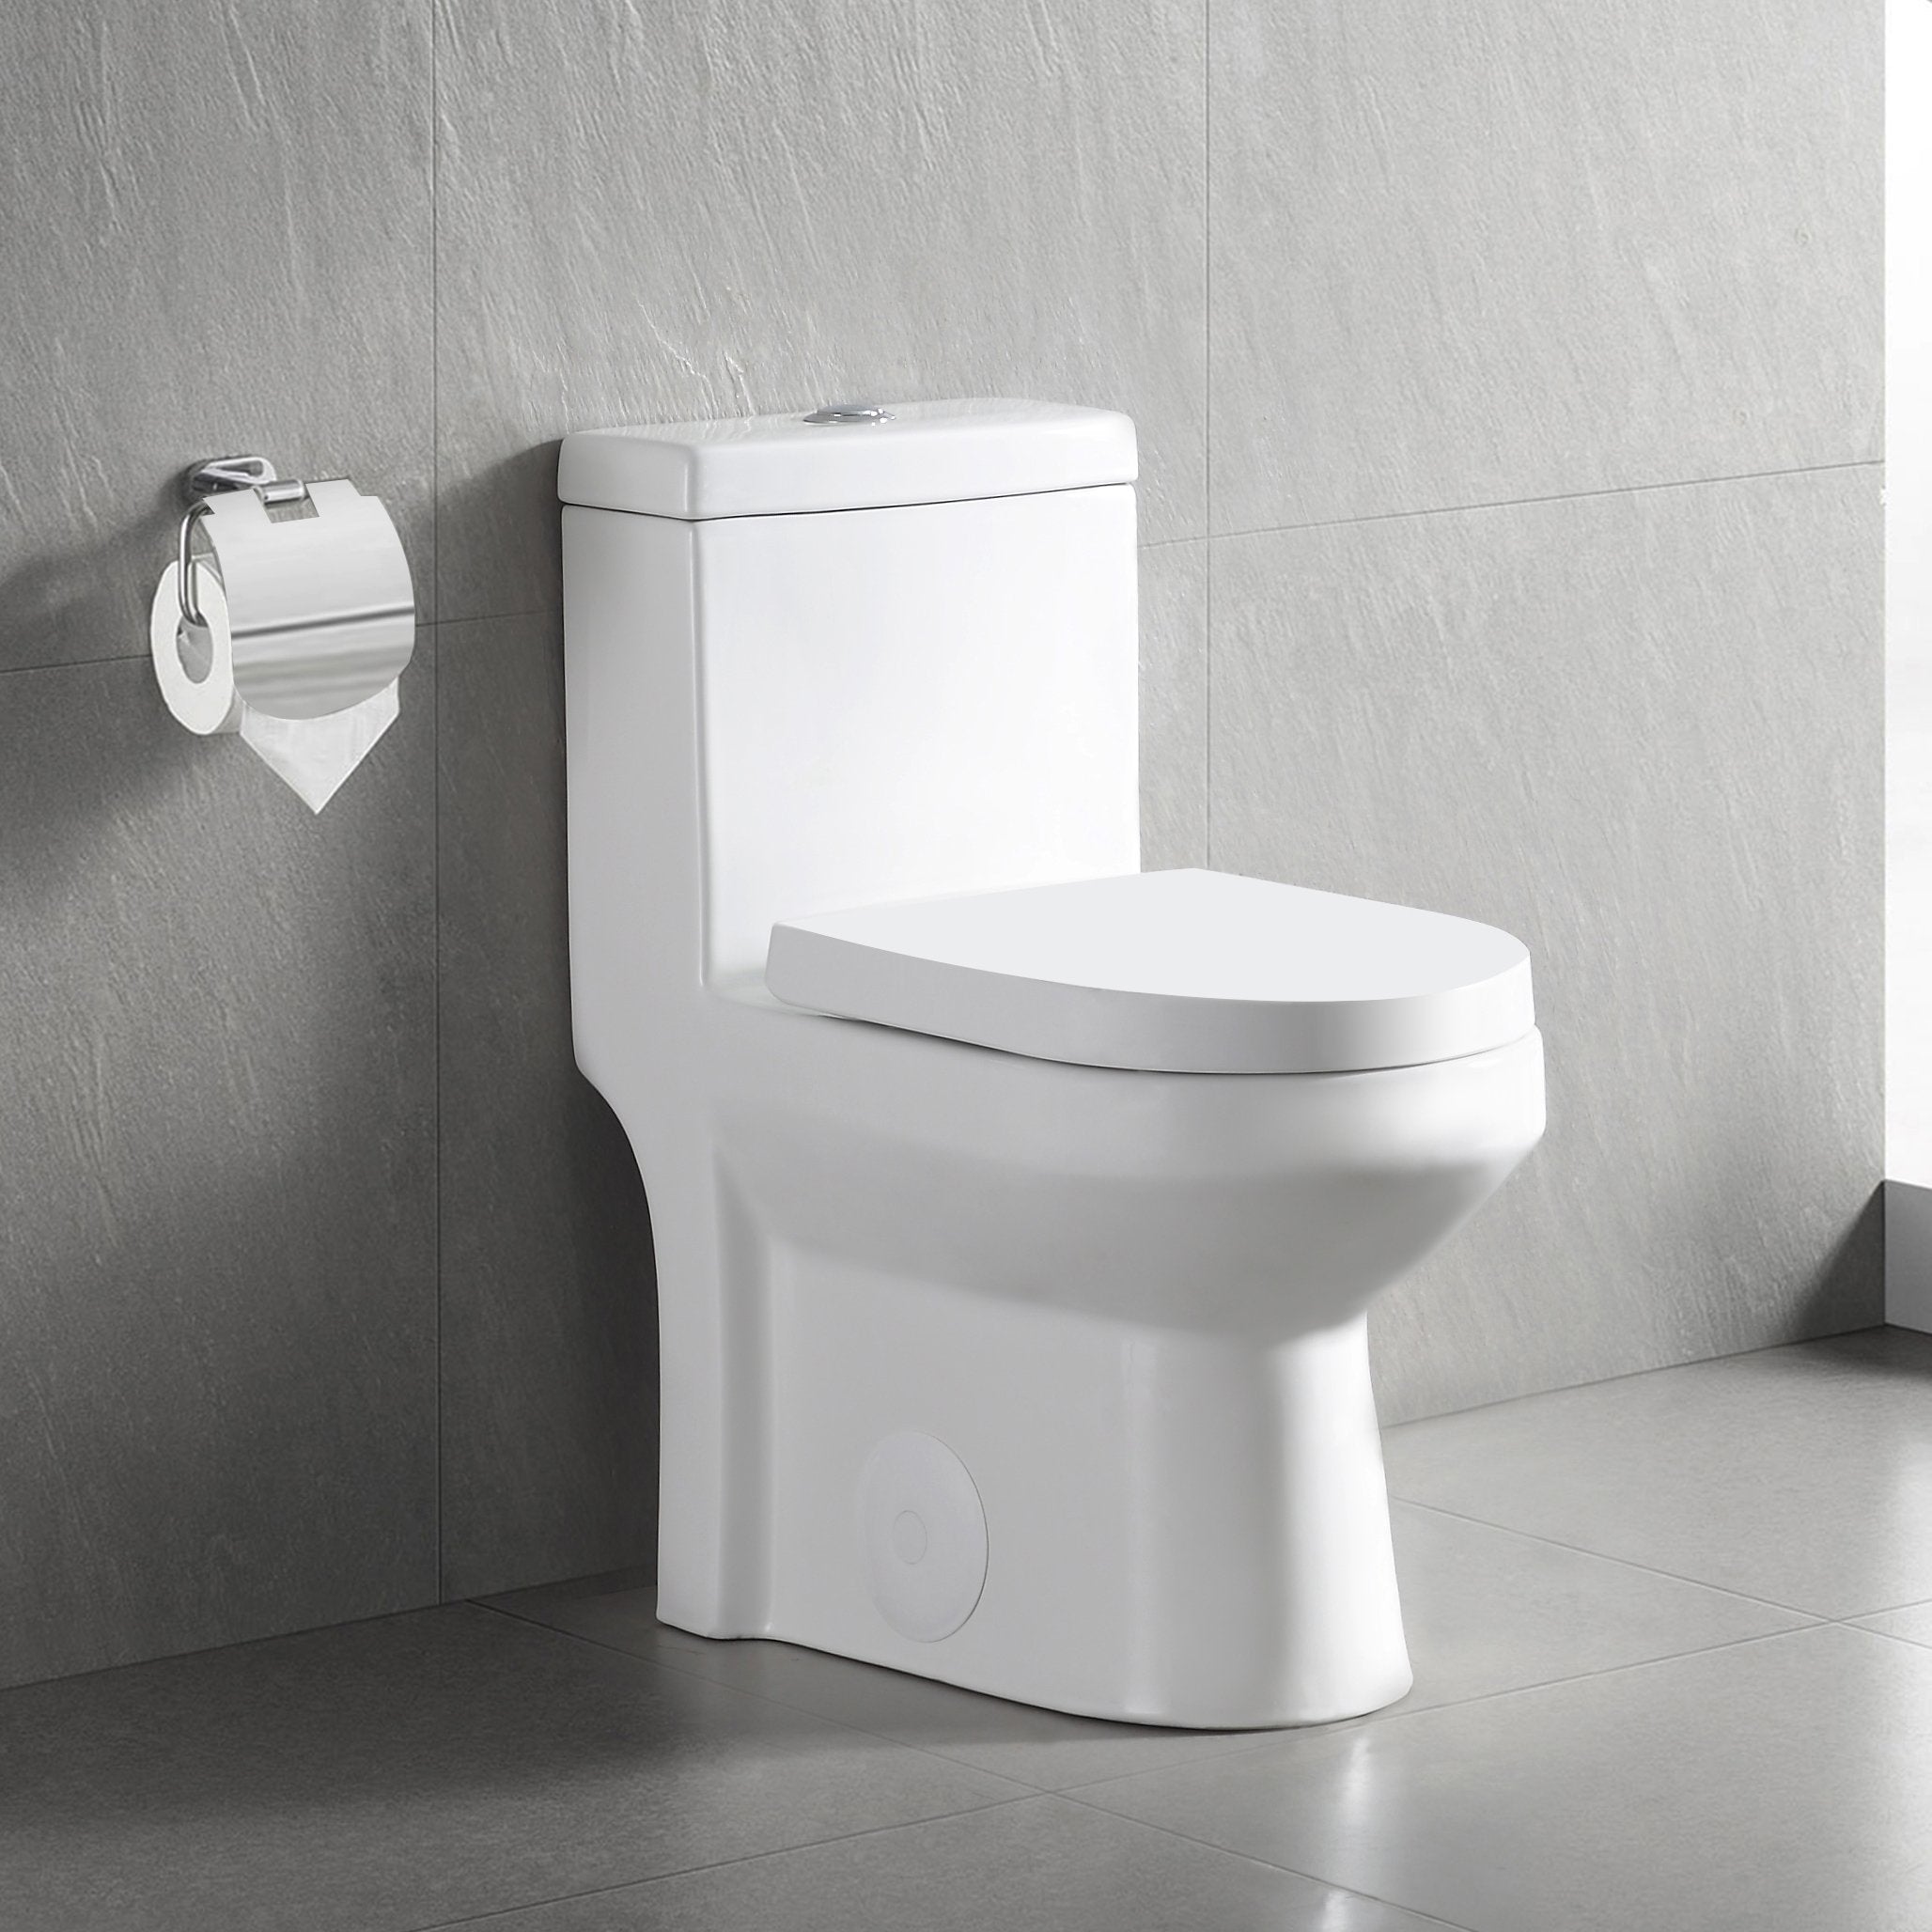 HOROW Small Compact One Piece Toilet For Bathroom, Quiet Dual Flush Modern  Toilet, 12'' Rough-In Toilet & Soft Closing Seat 